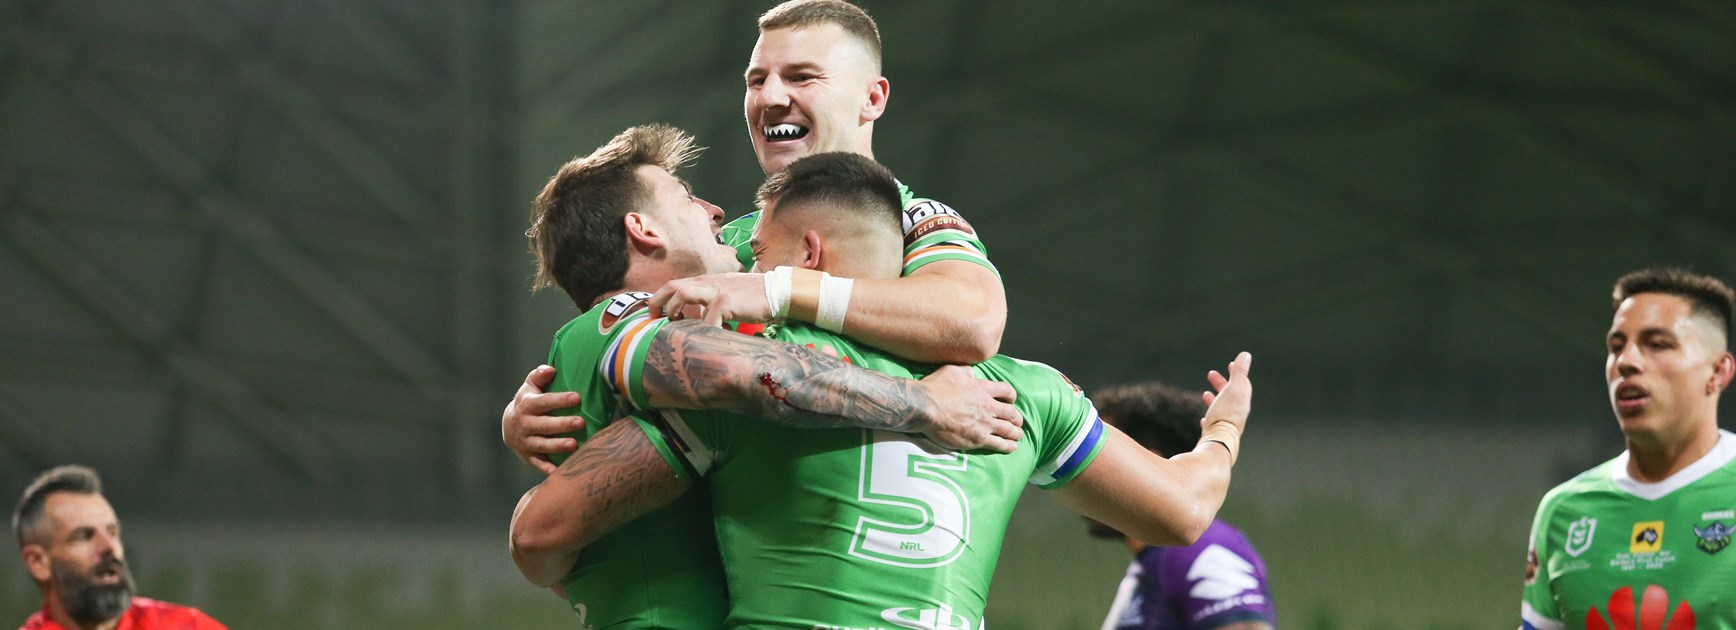 The Raiders celebrate a try in Melbourne.